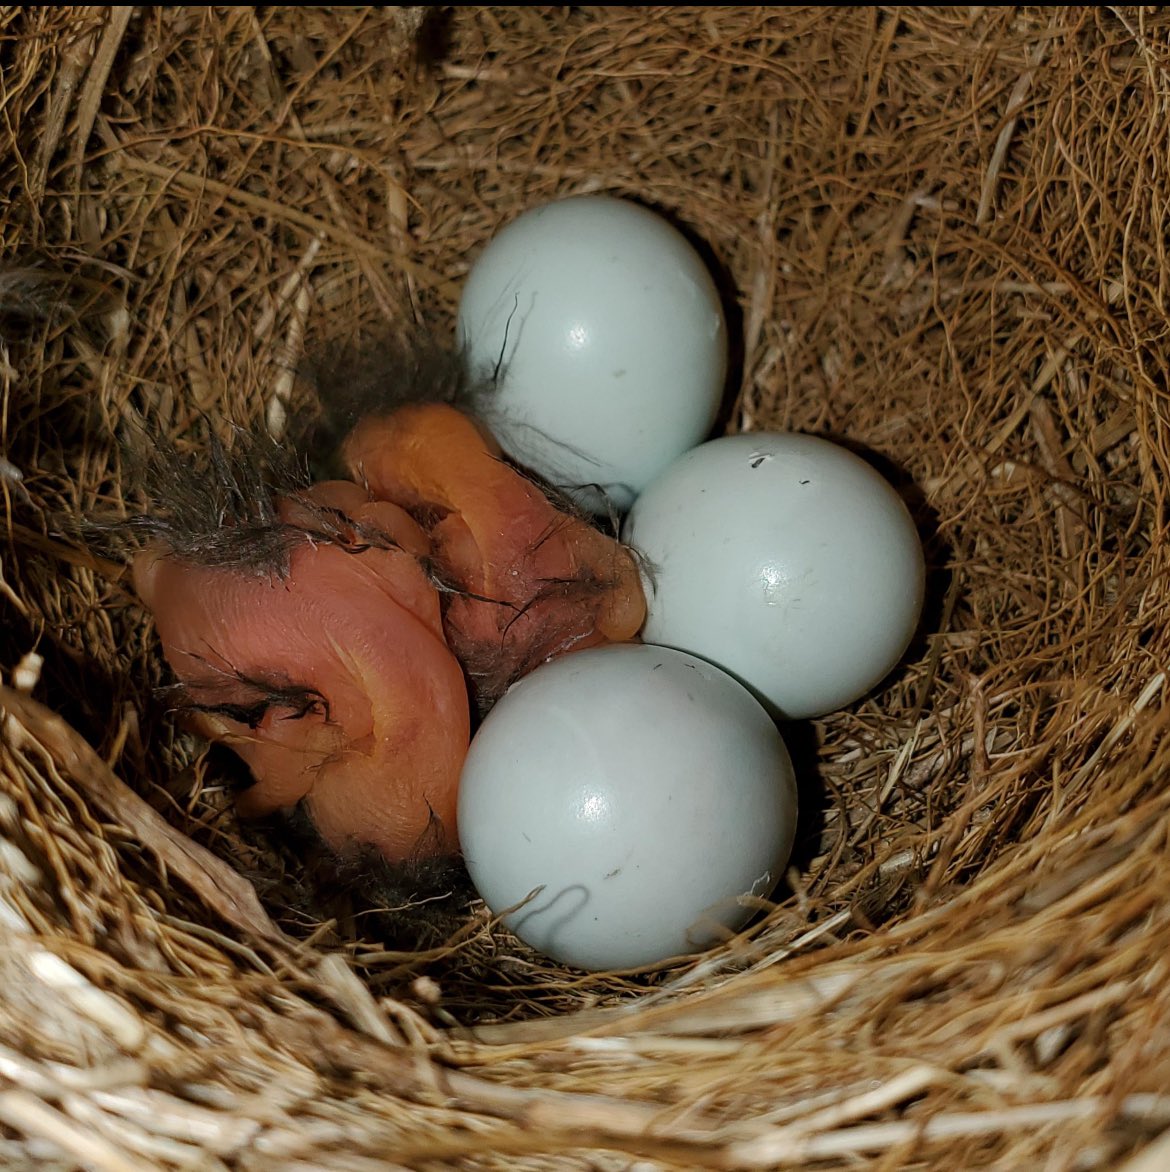 Welcome to the world, little ones! A couple of the bluebird eggs have just hatched. #FaunaFriday @YaleLibrary